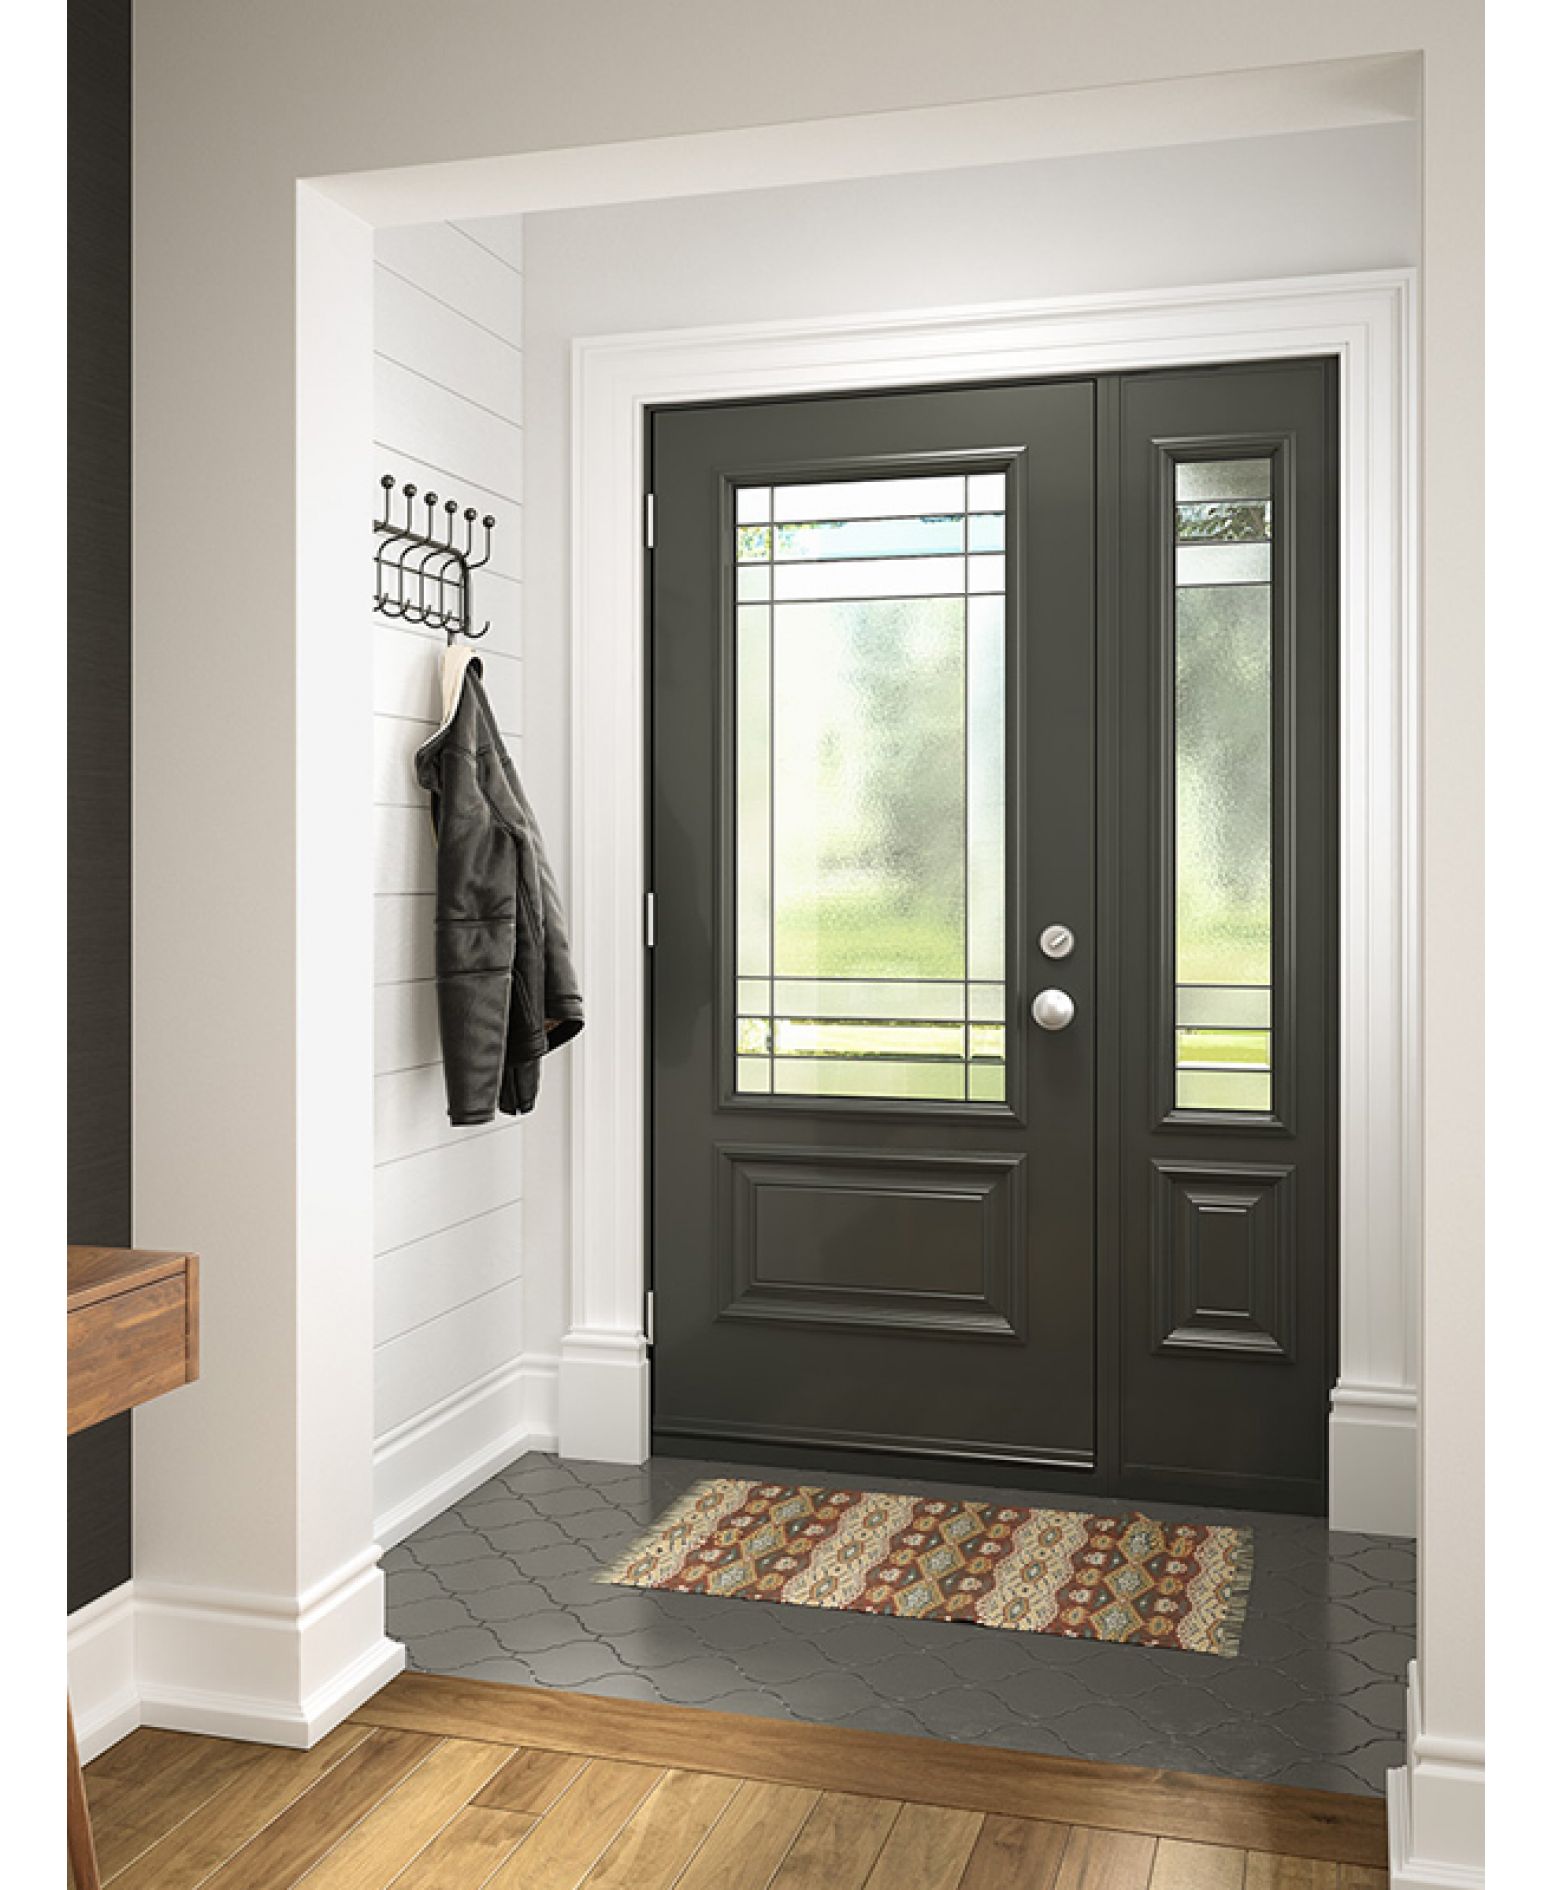 Door Makeover 101: Everything You Need To Know About Door Replacement